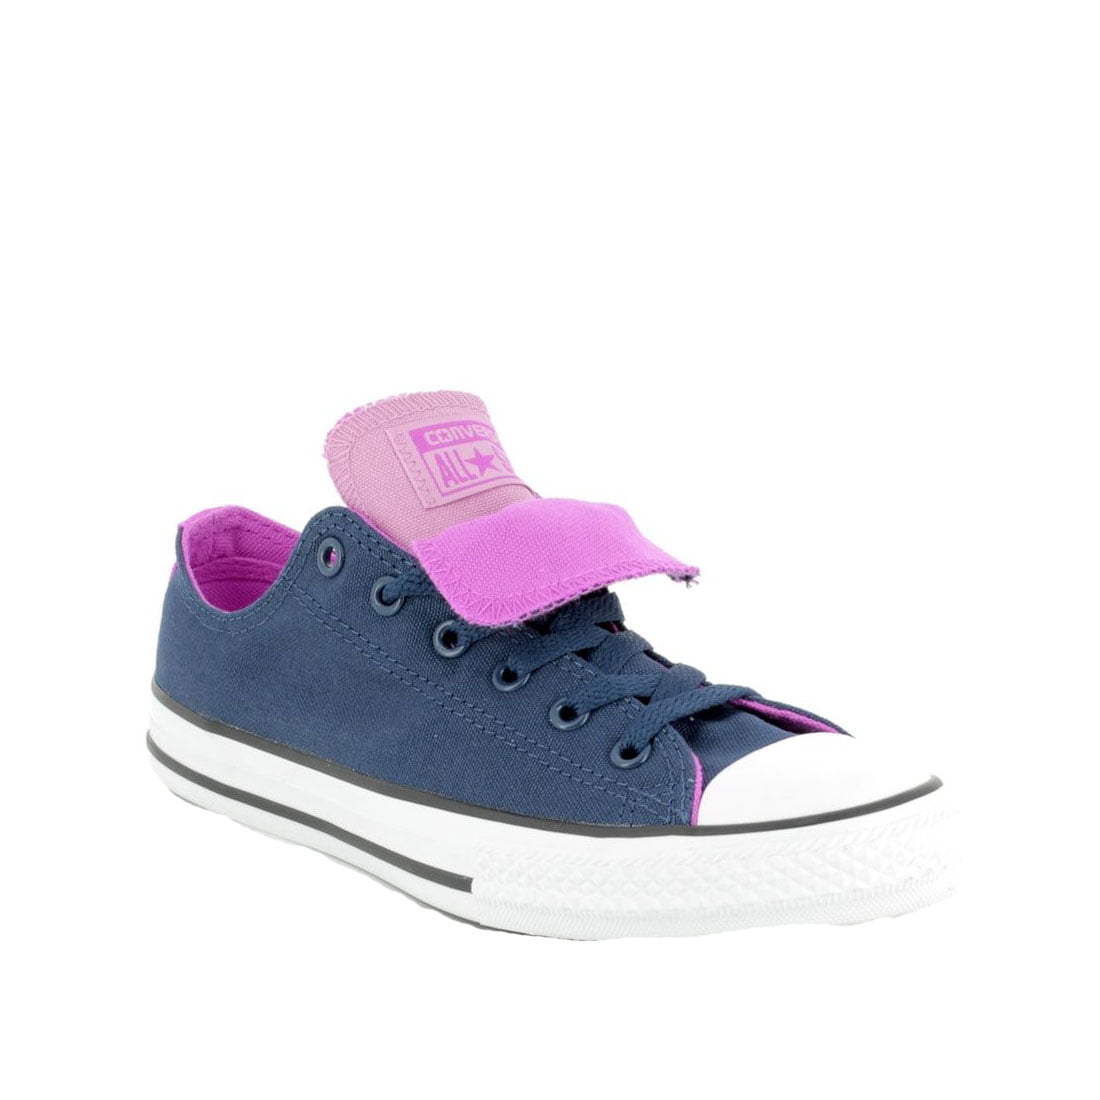 Converse All Star Double Tongue Ox Kids Unisex/Child Shoe Size Kids 4  Casual 660001C Navy Pink